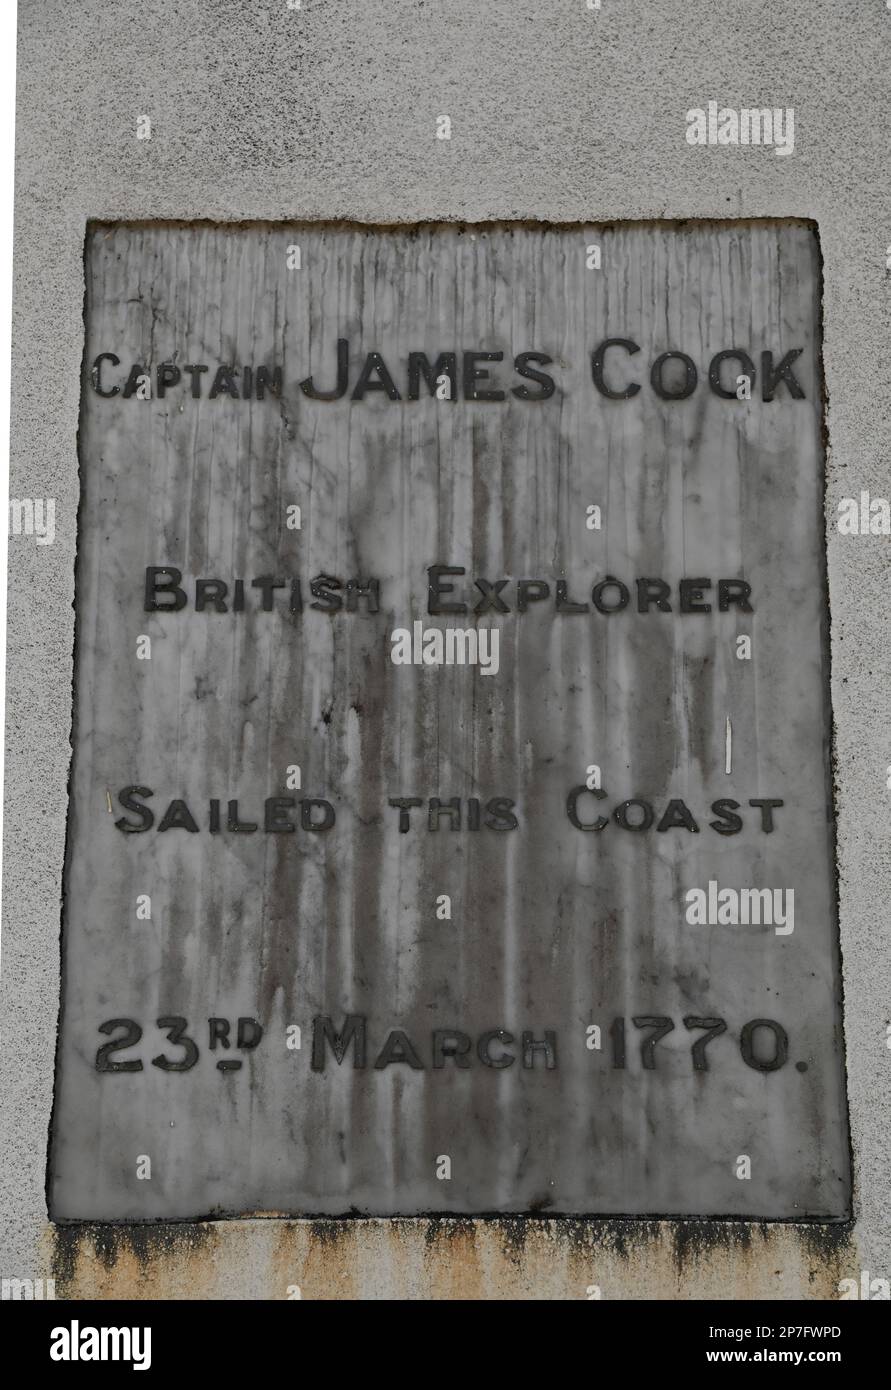 One of four commemorative plaques on an obelisk in Okarito, West Coast, erected to mark the centennial of the founding of New Zealand. Stock Photo